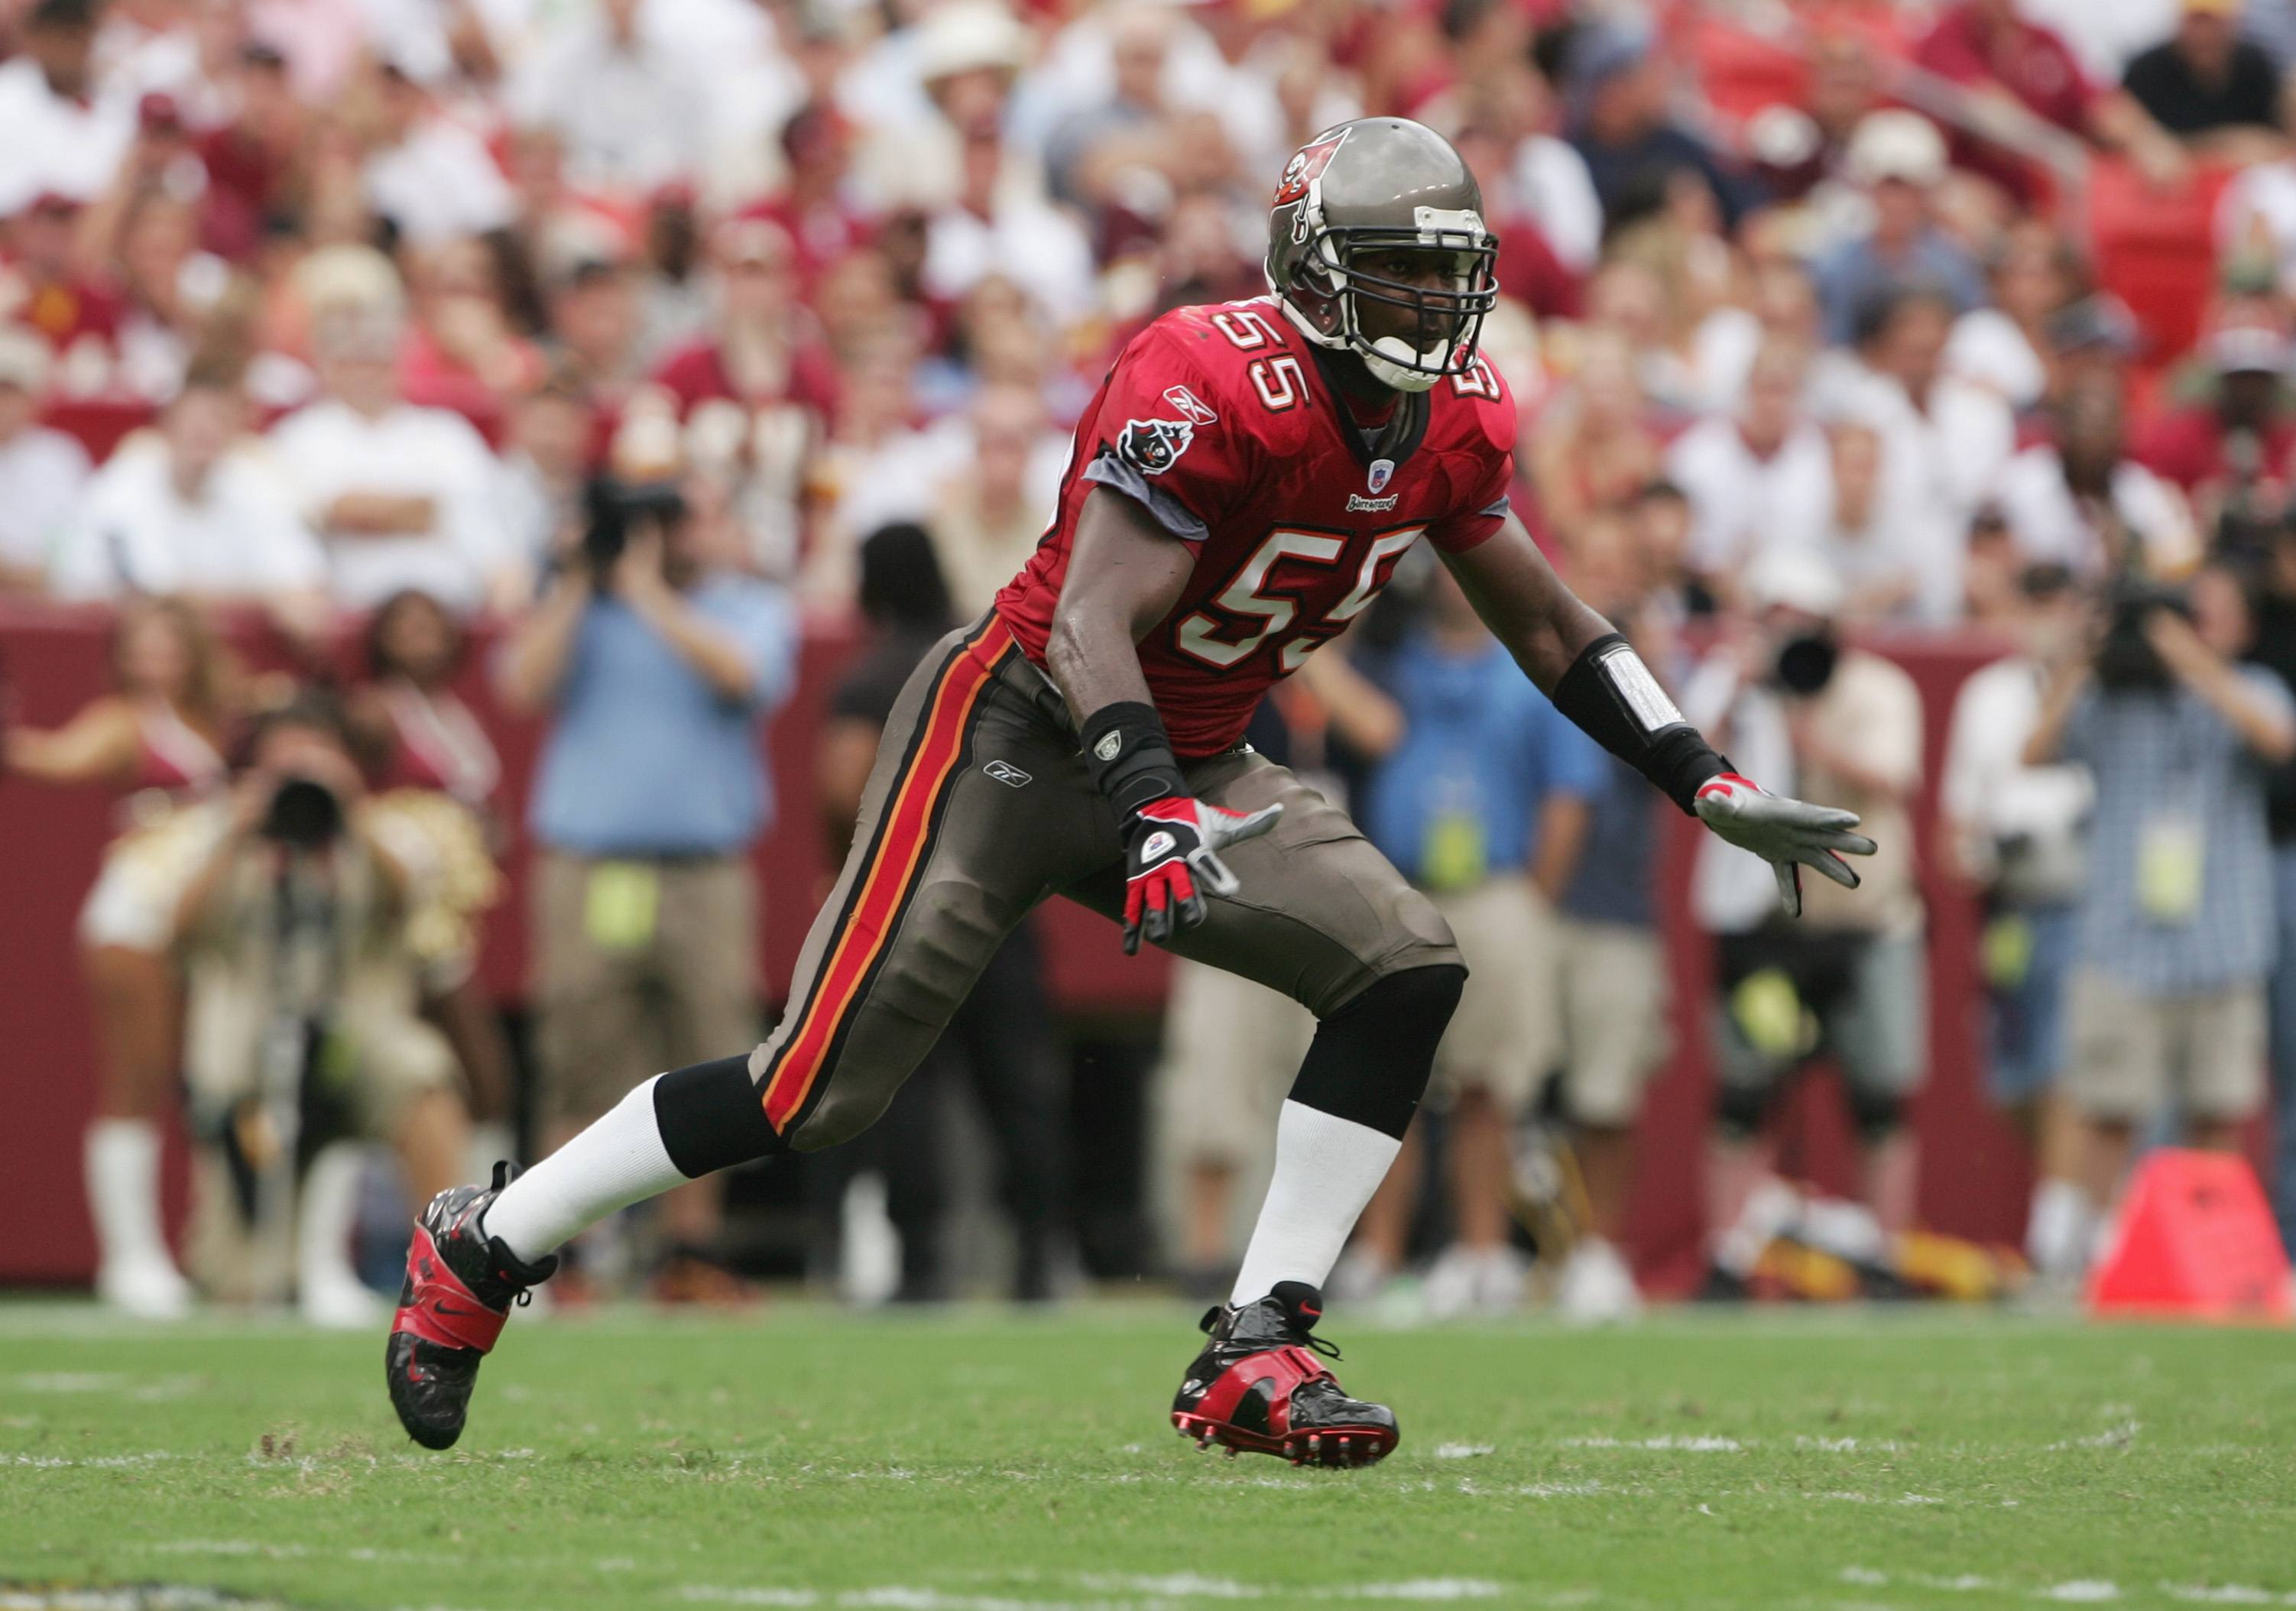 Derrick Brooks is one of the greatest NFL linebackers ever